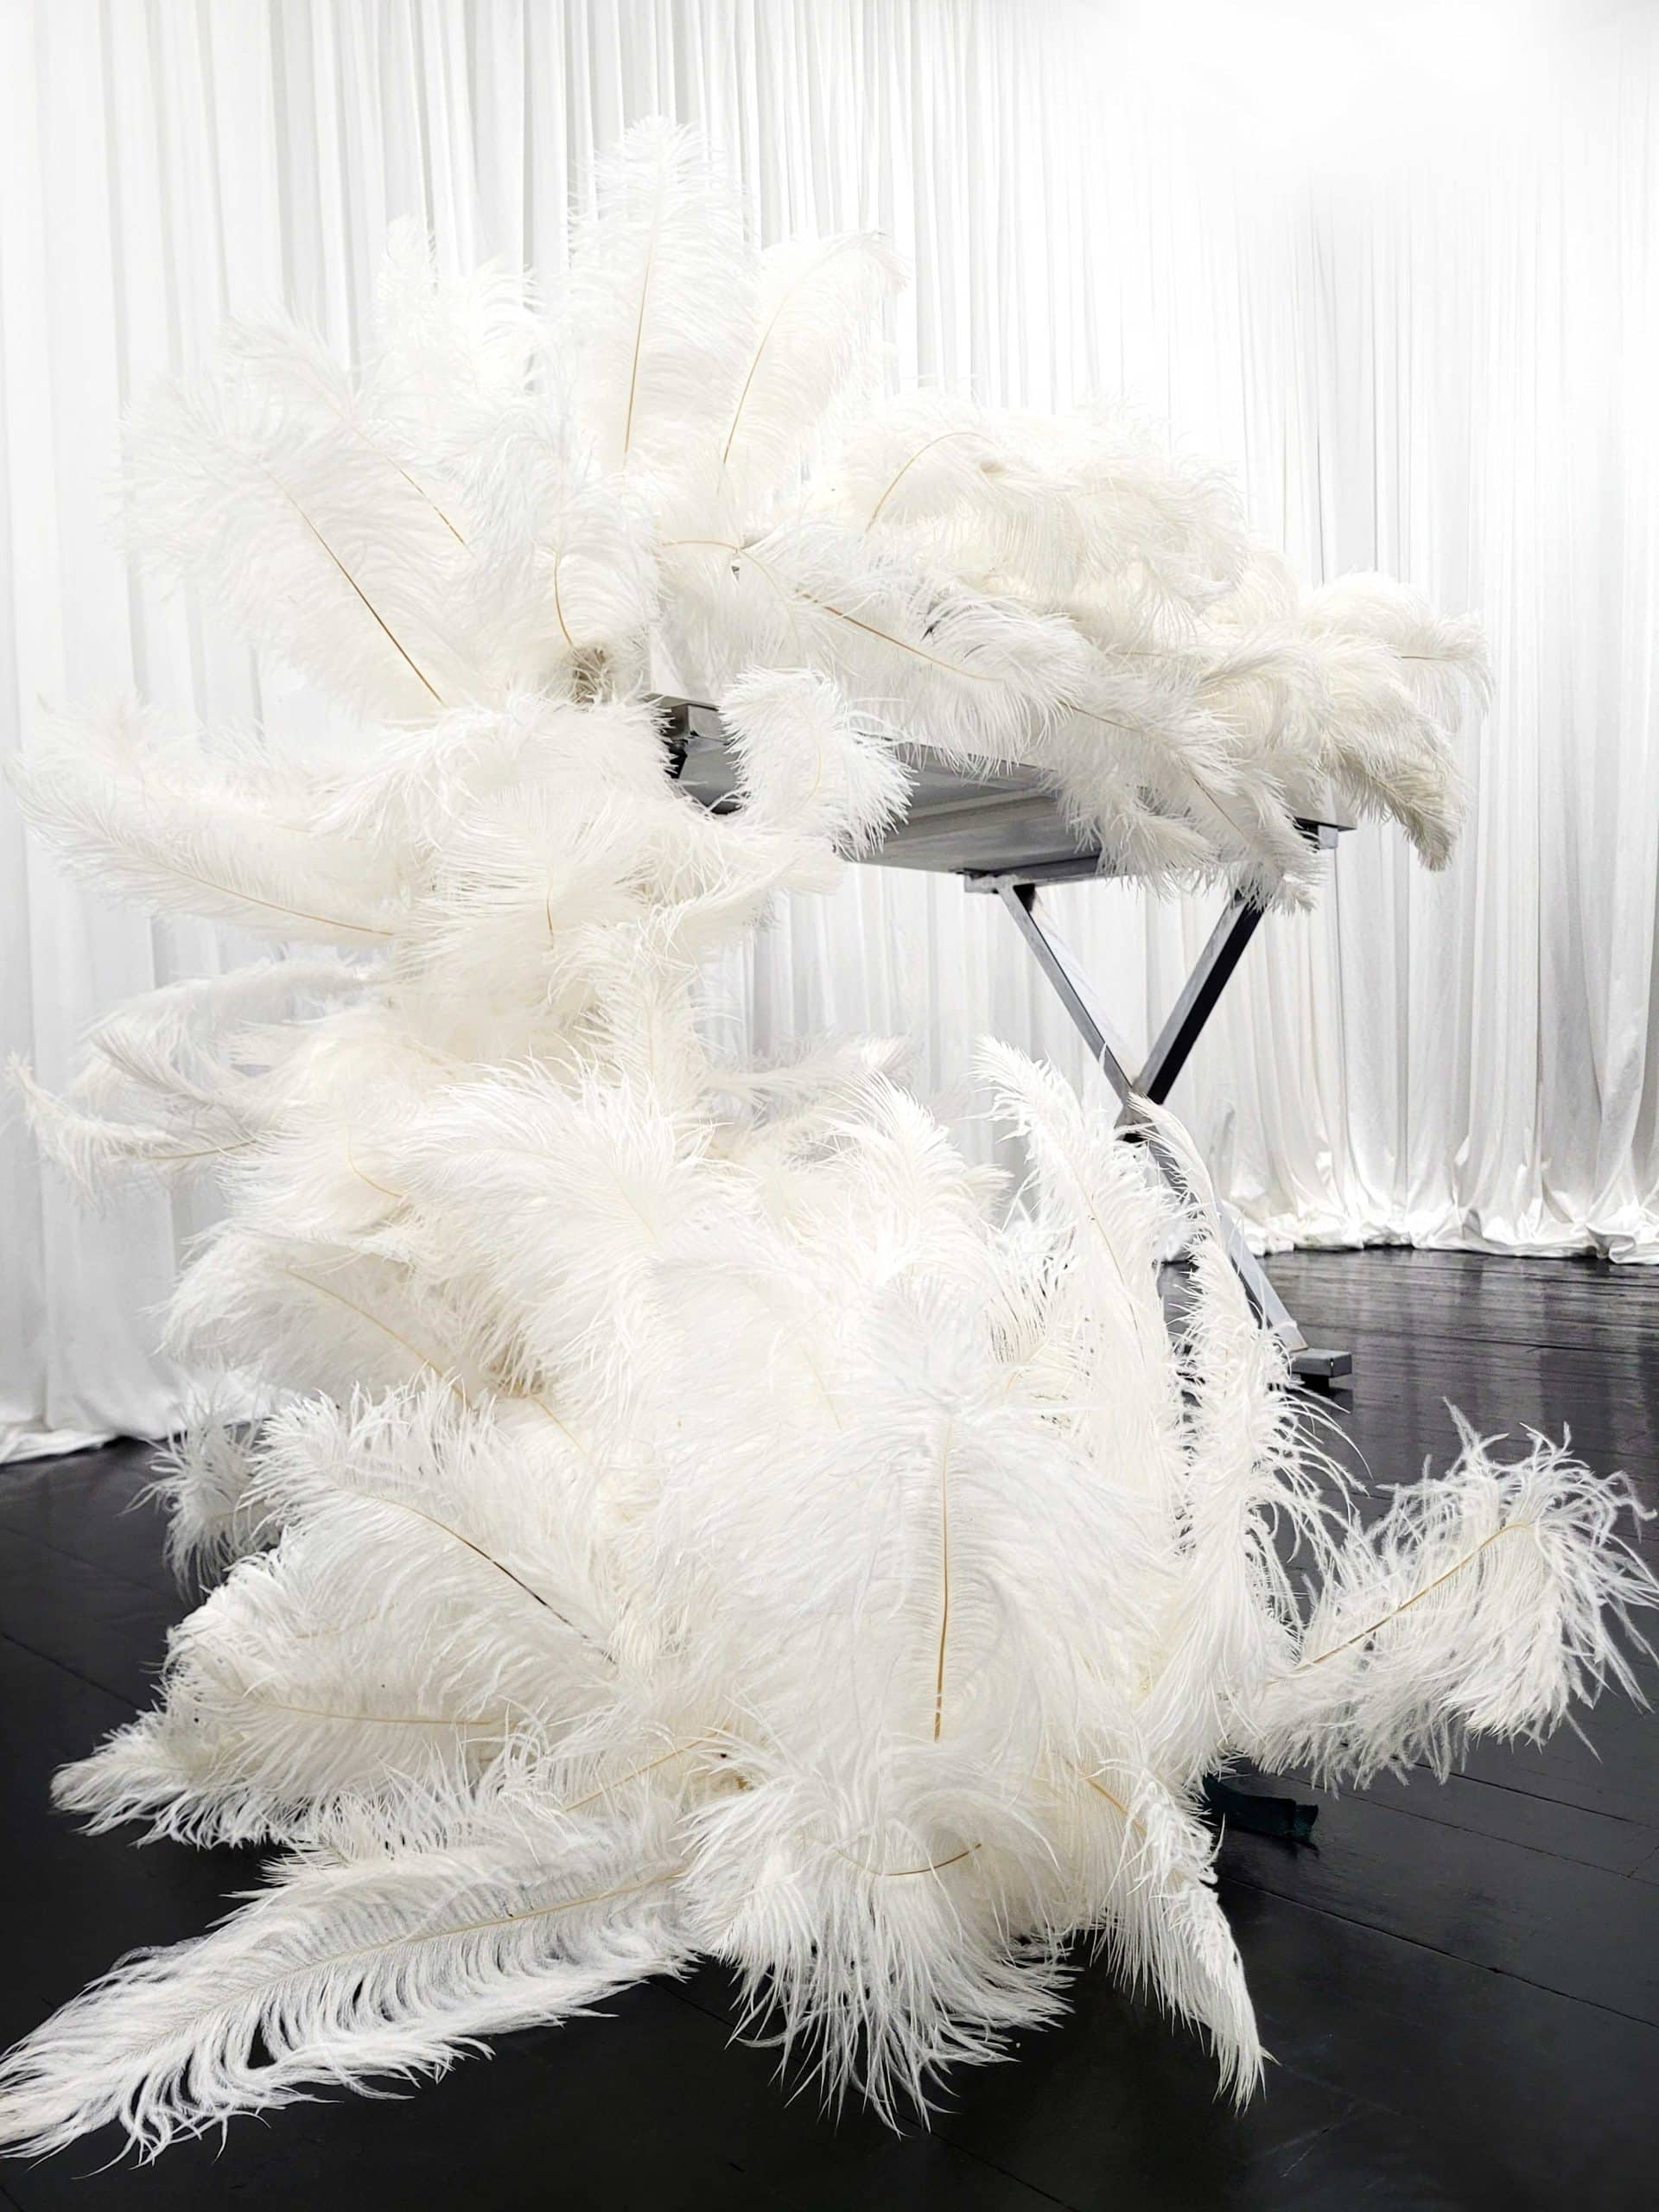 Up for your consideration and pleasureChristmas White Feather Garland  Decoration GRA…